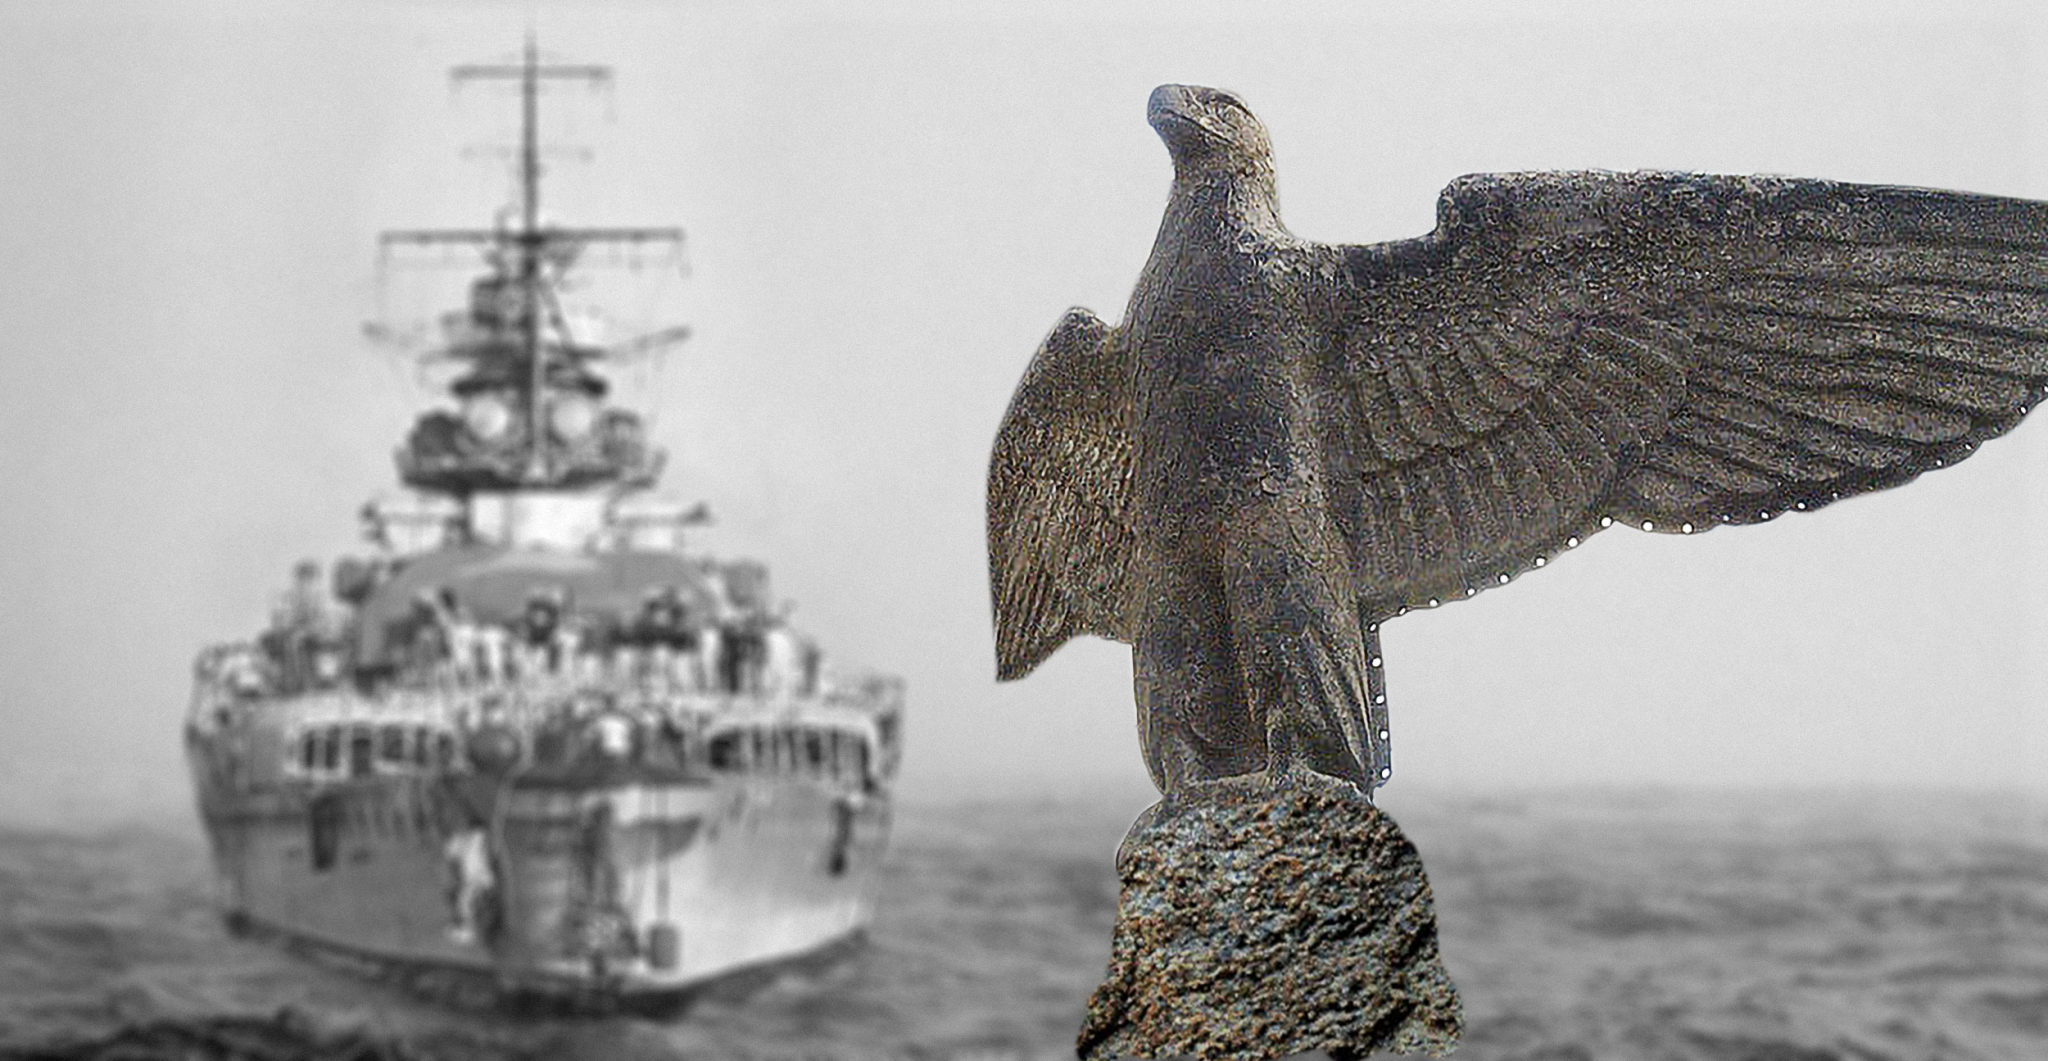 800-pound, bronze eagle, recovered from a German battleship Graf Spee recovered off the coast of the South American nation.